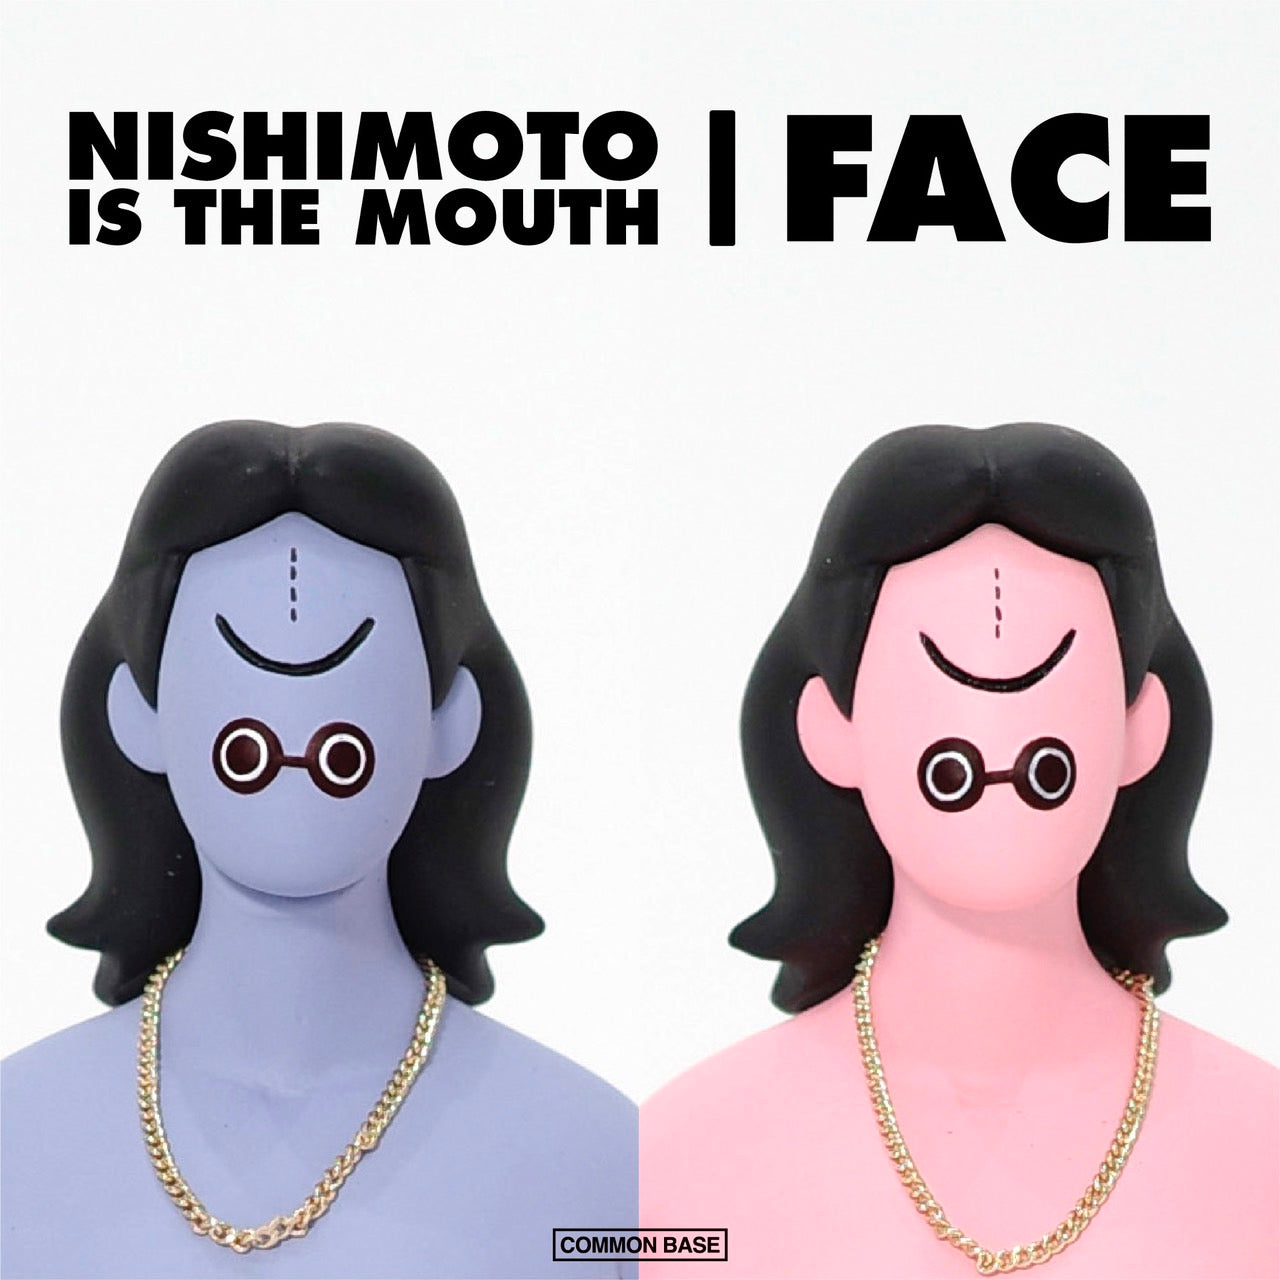 【NISHIMOTO IS THE MOUTH】<br>「face」とのコラボフィギュアが4/15(月)20時より数量限定で発売！